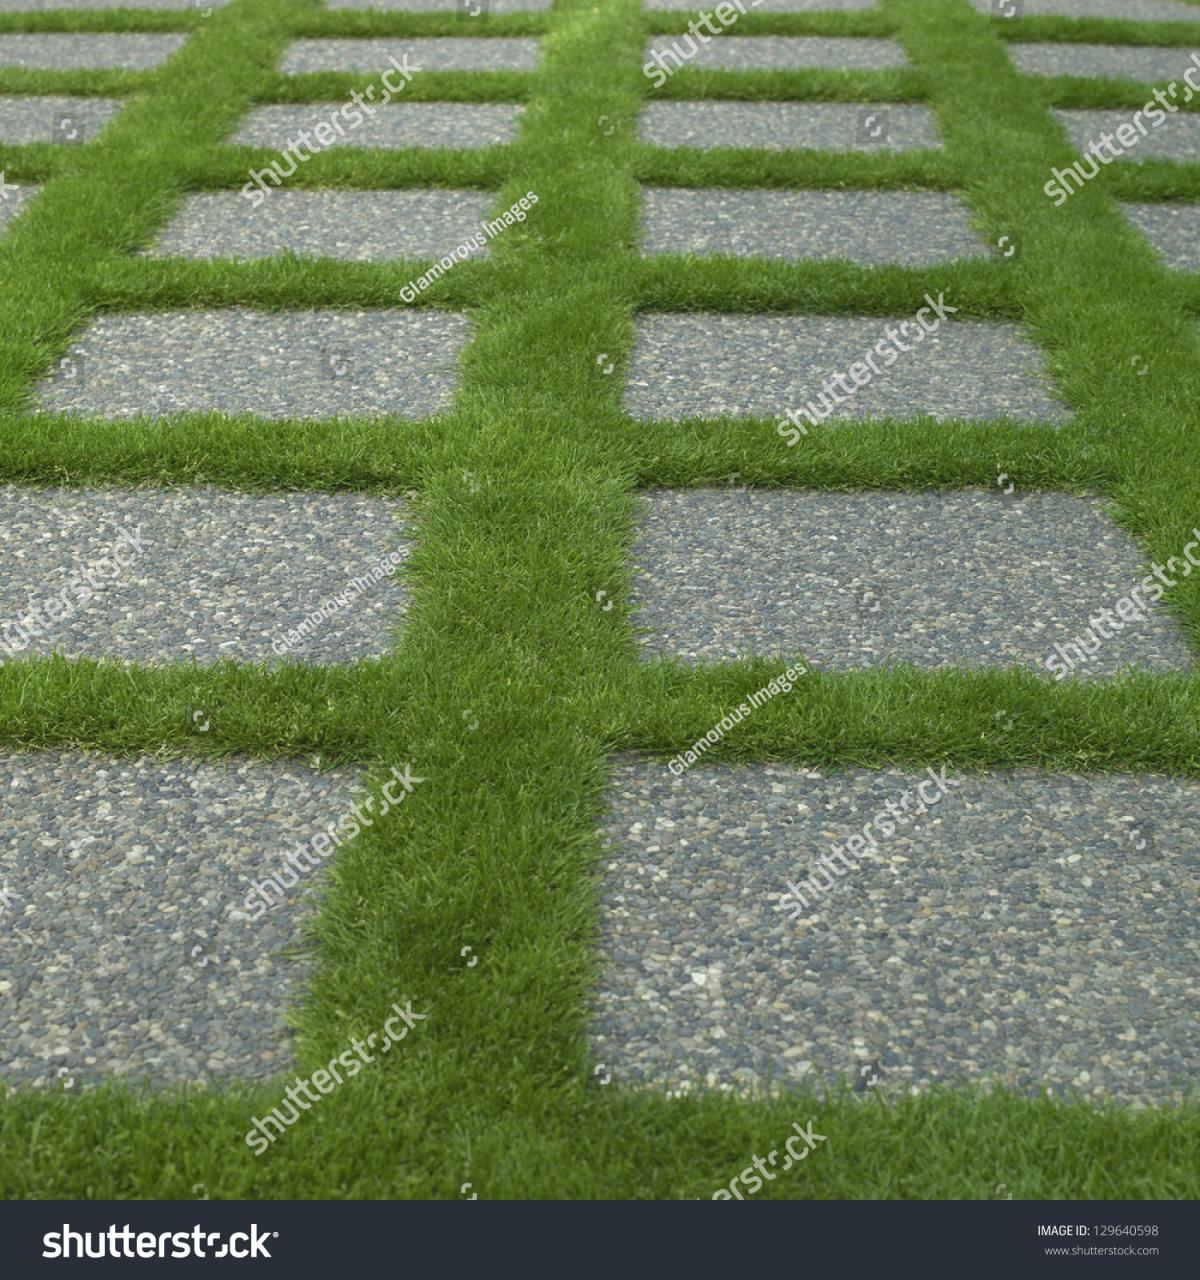 Manicured Grass And Stone Tiles Stock Photo 129640598 : Shutterstock